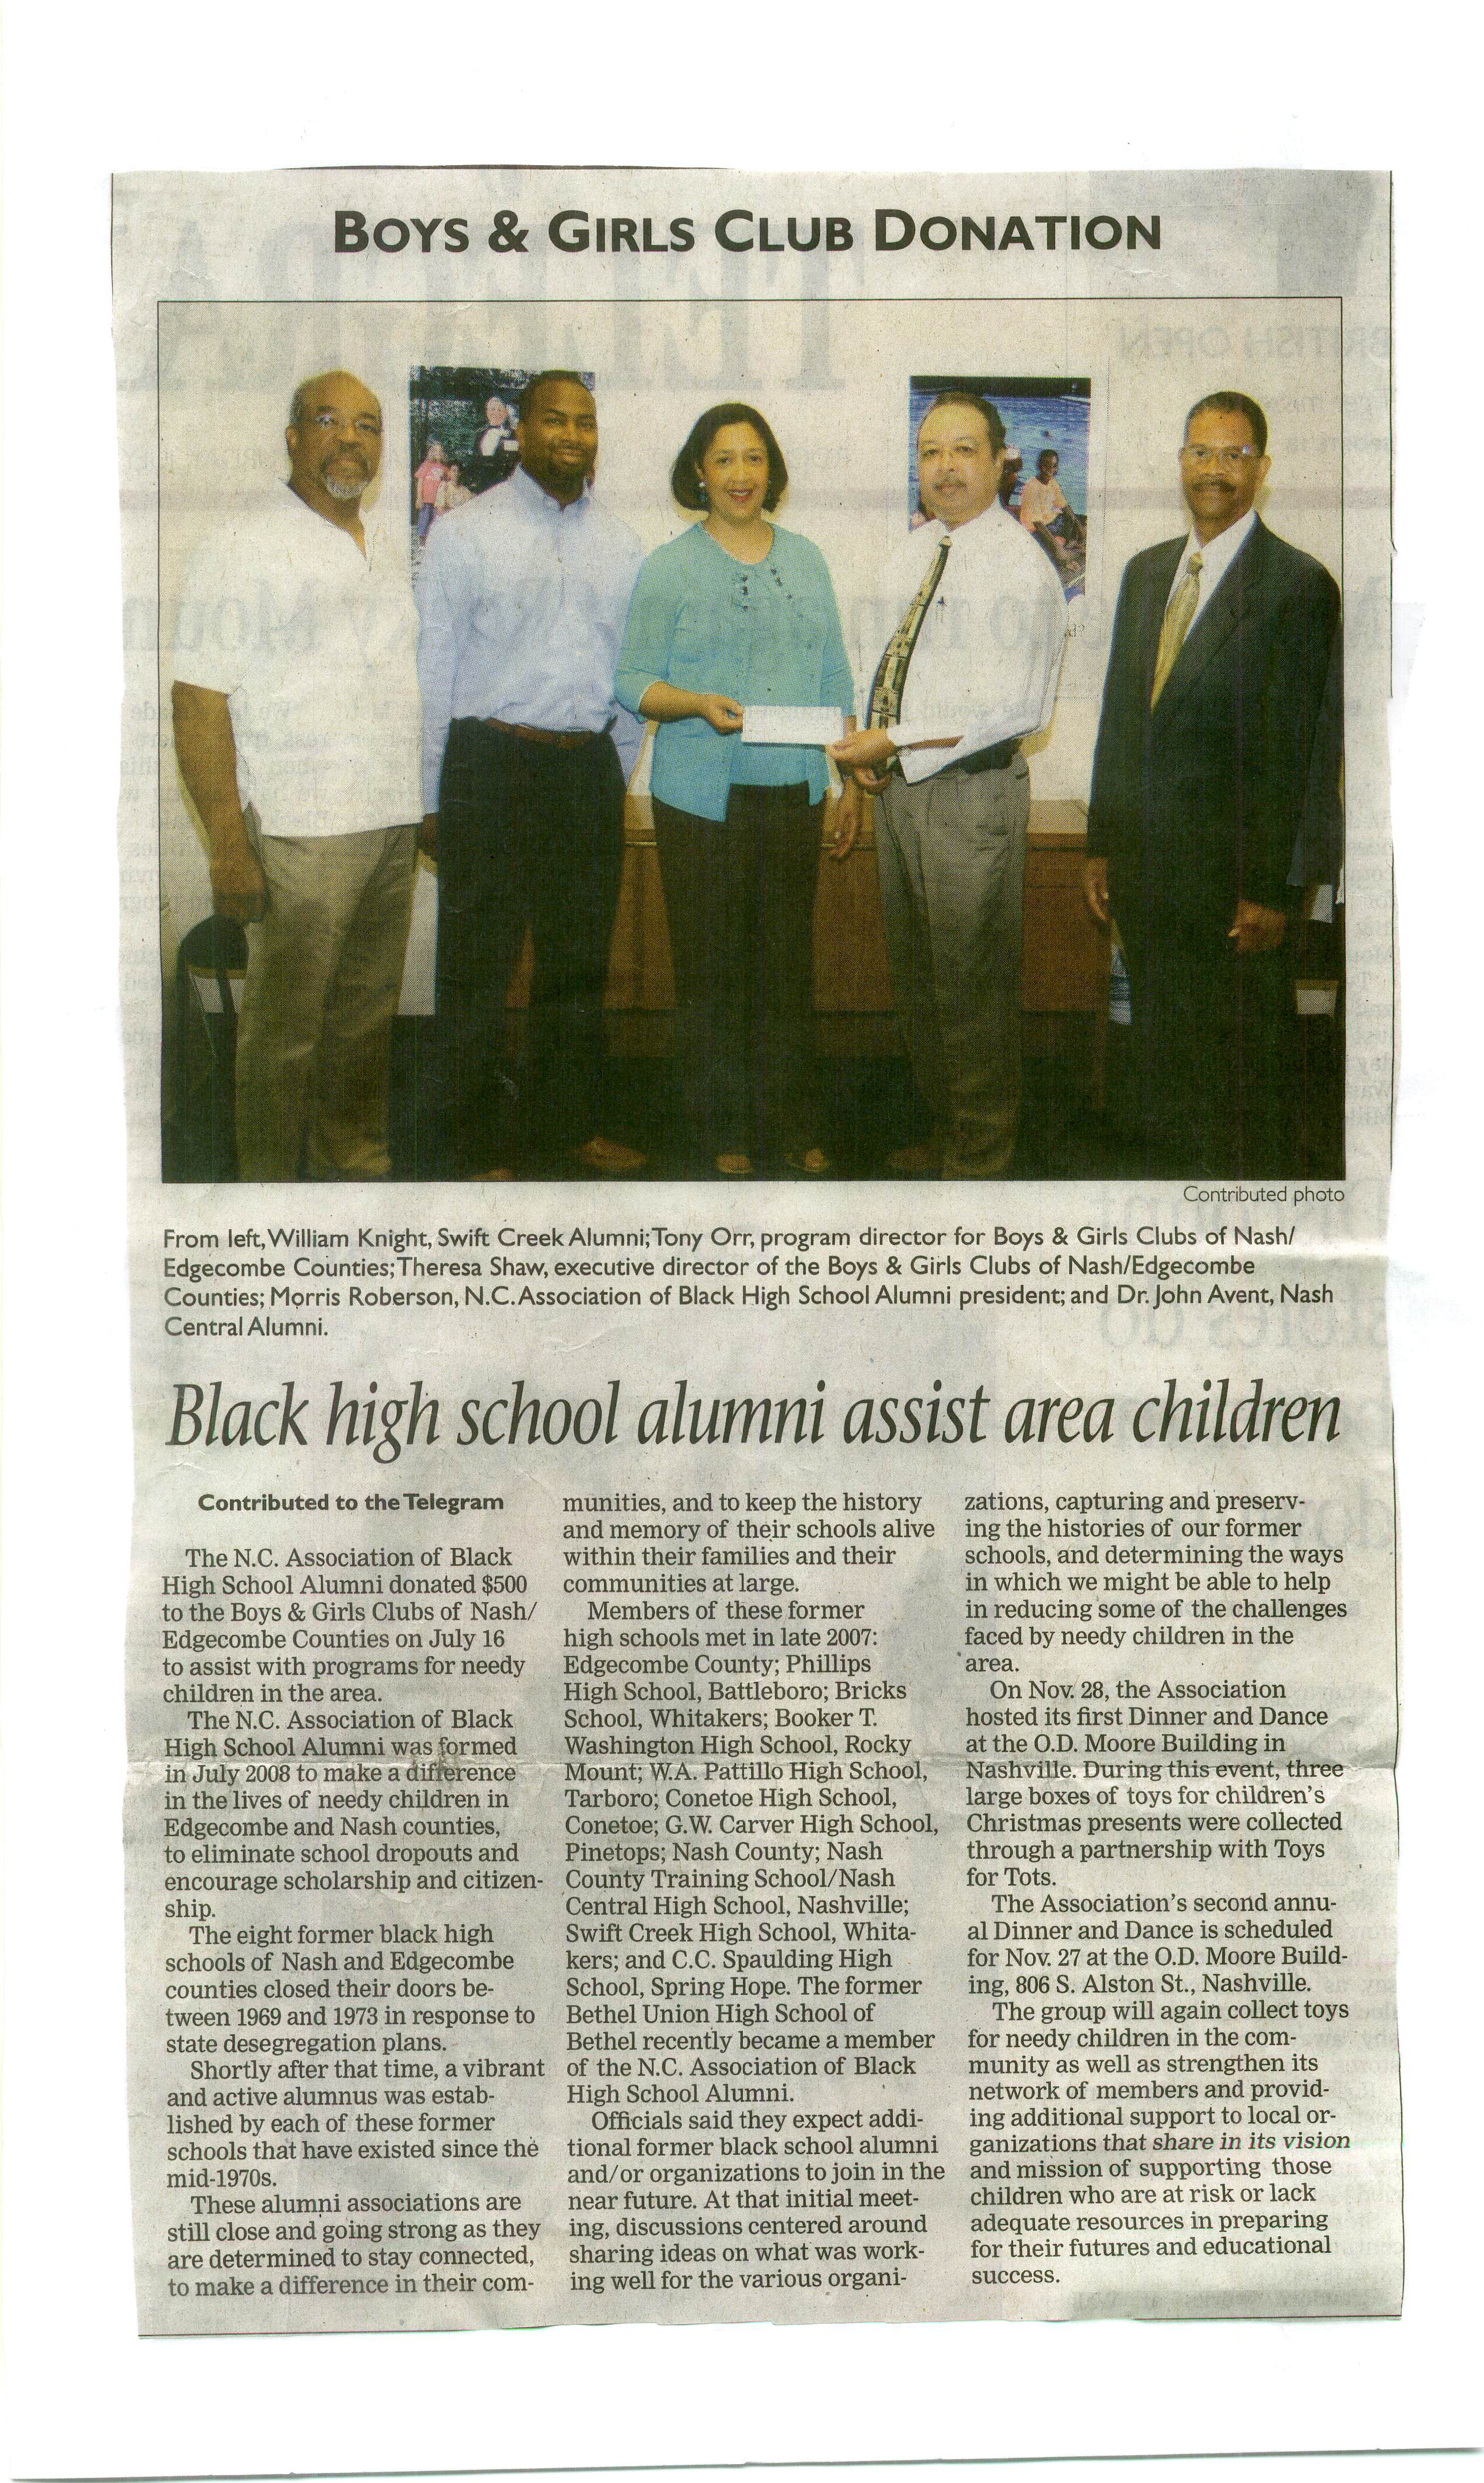 NCABHSA - MAKING A DONATION TO EDGECOMBE/NASH BOYS AND GIRLS CLUB 2009